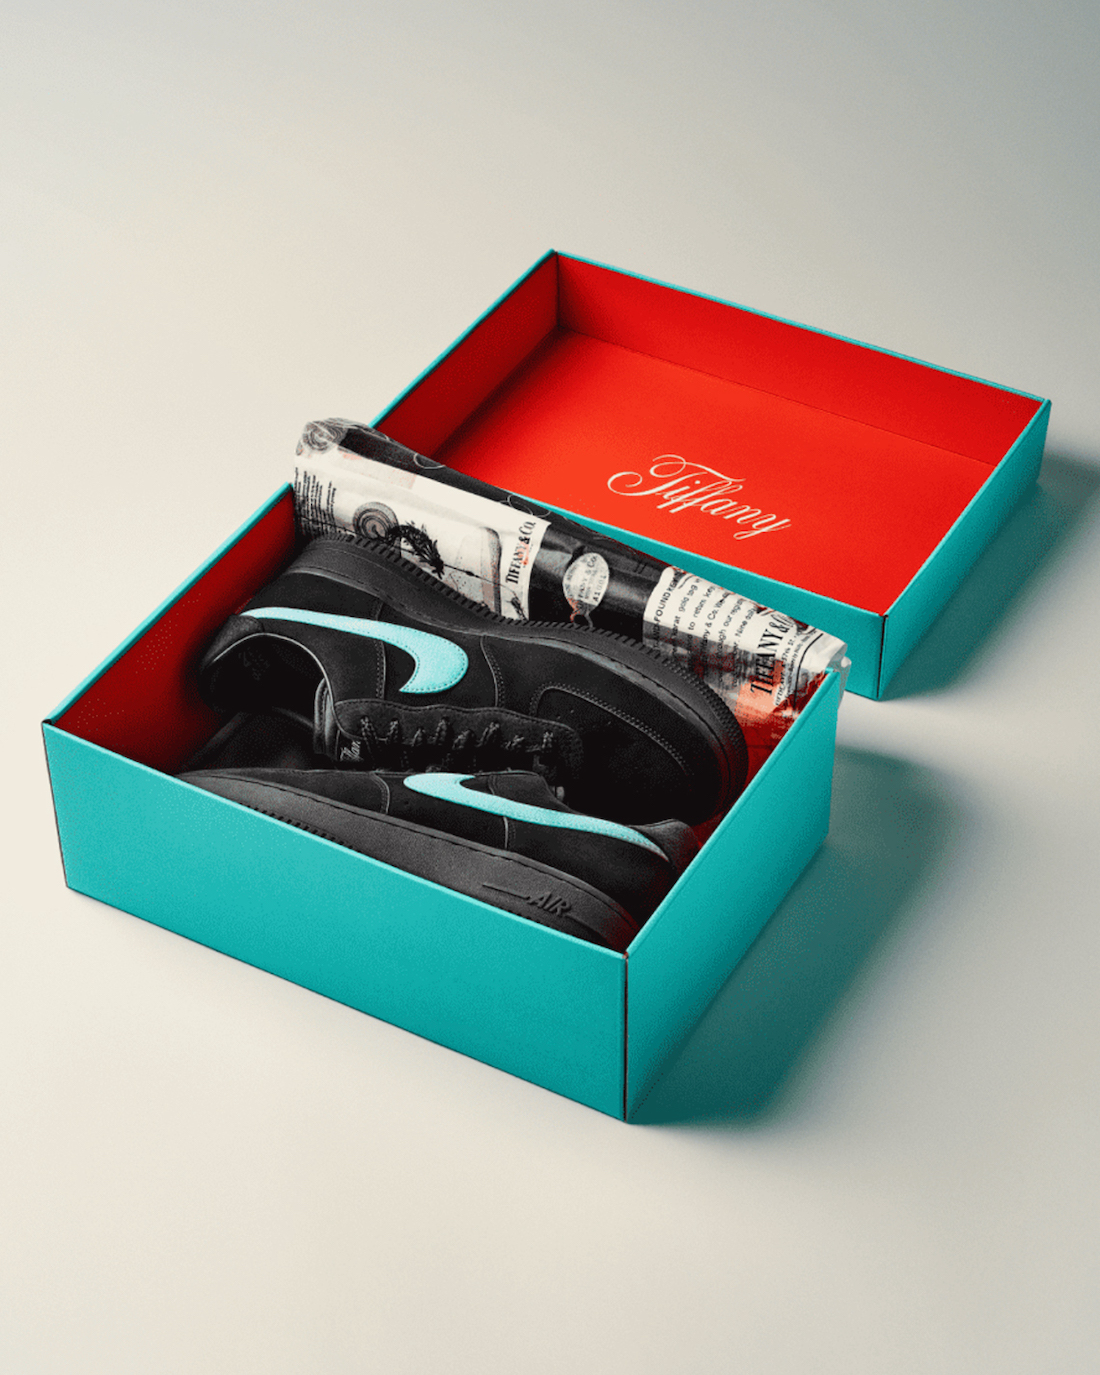 Tiffany Nike Air Force 1 Low DZ1382-001 Release Date